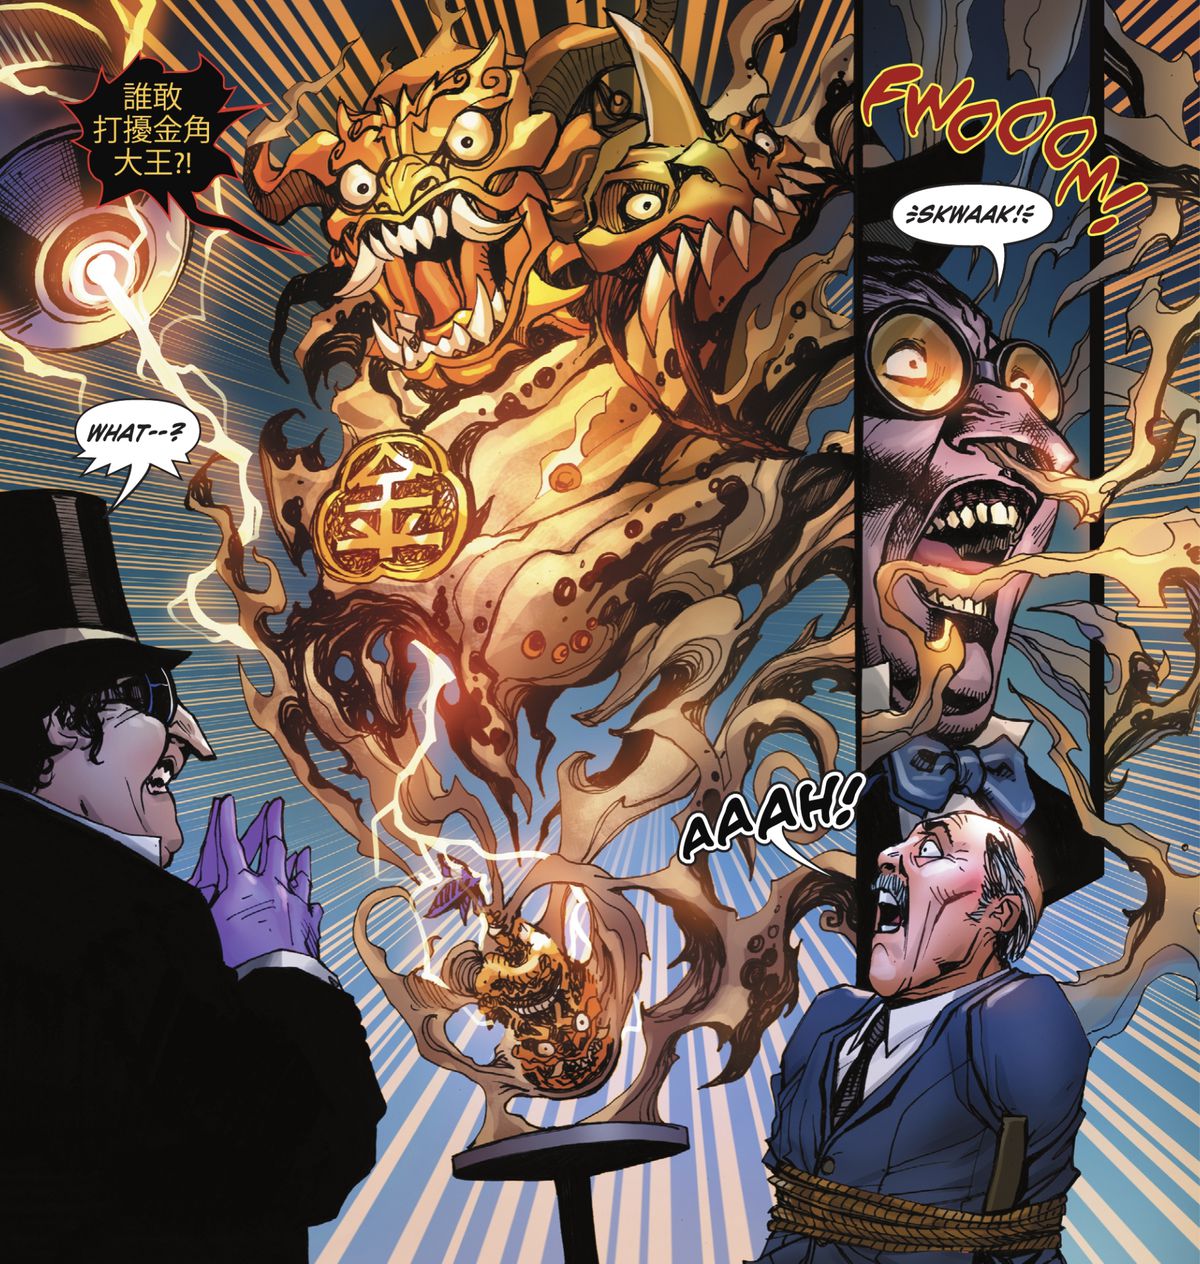 A gold Chinese demon pops out of a gold carved gourd to menace a surprised Penguin in Monkey Prince #1 (2022).